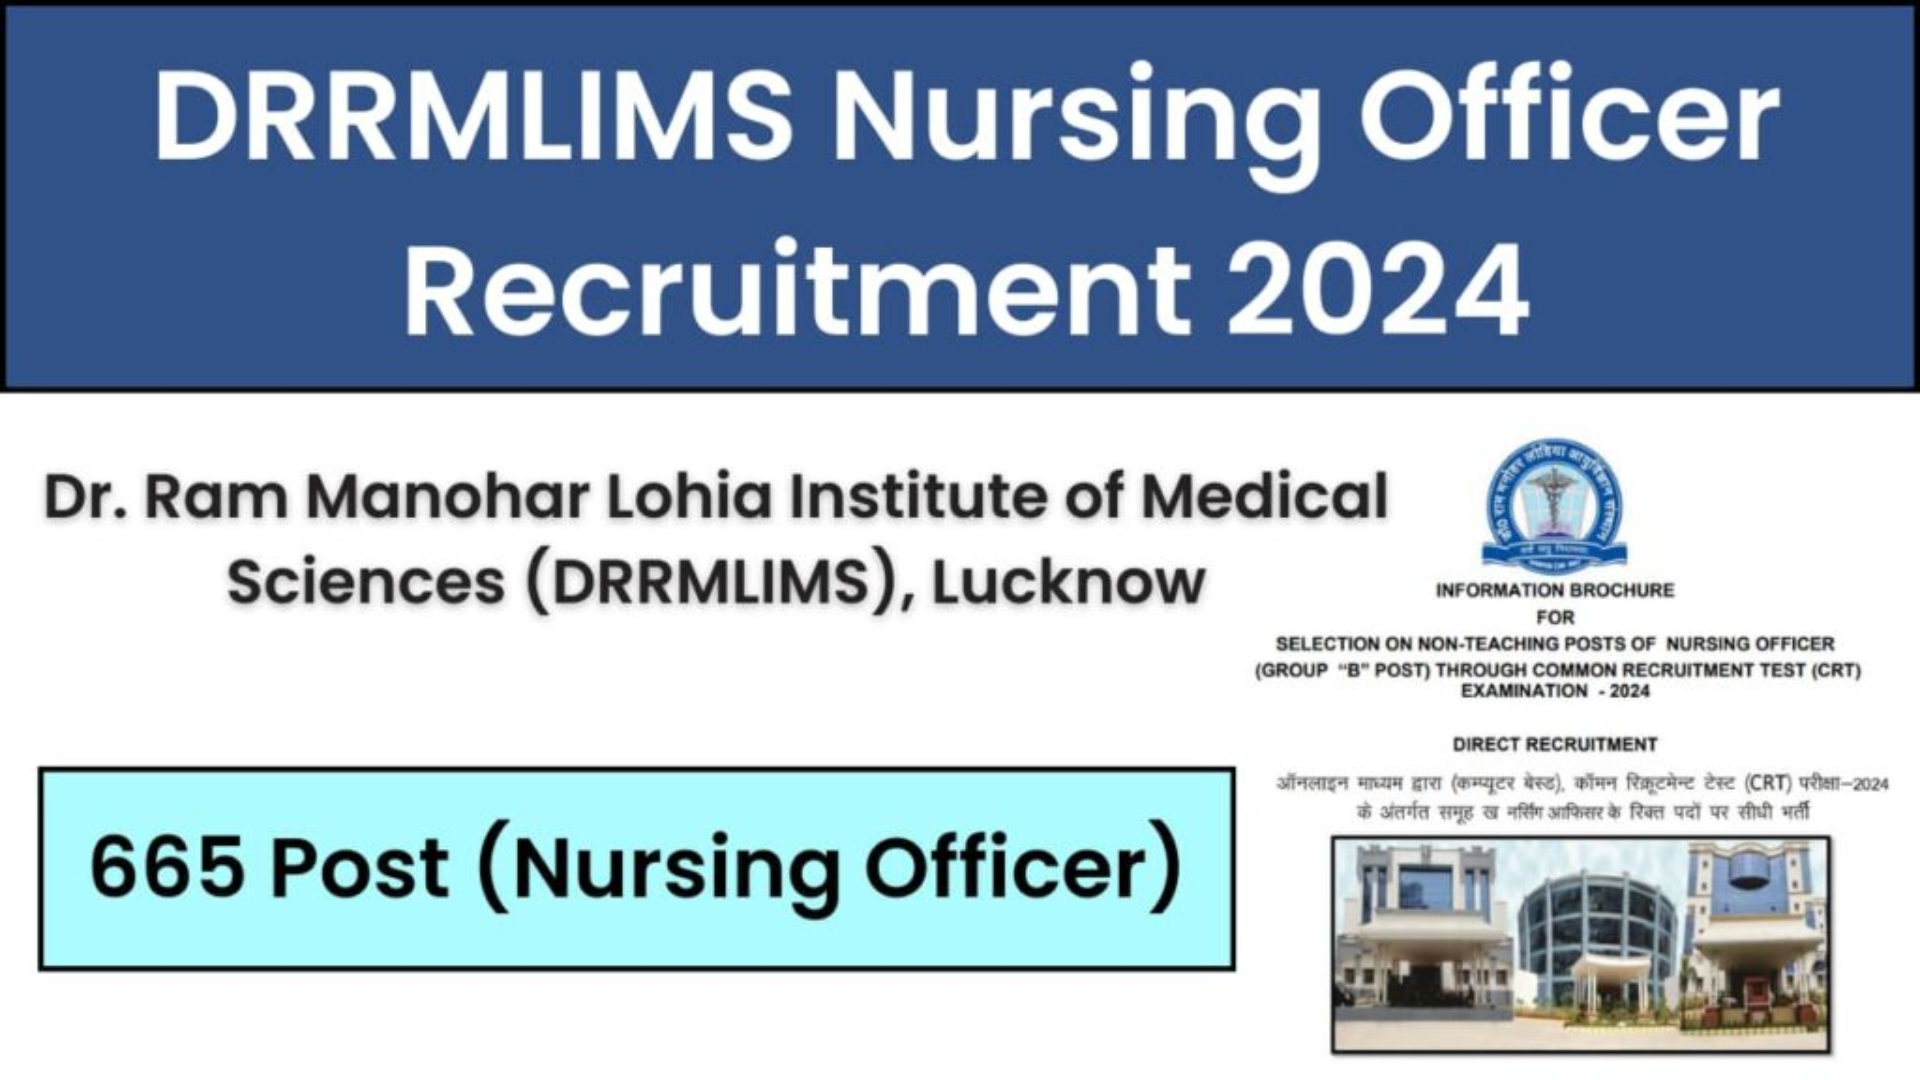 DRRMLIMS Nursing Officer Recruitment 2024 Notification Out for 665 Positions, Apply Online